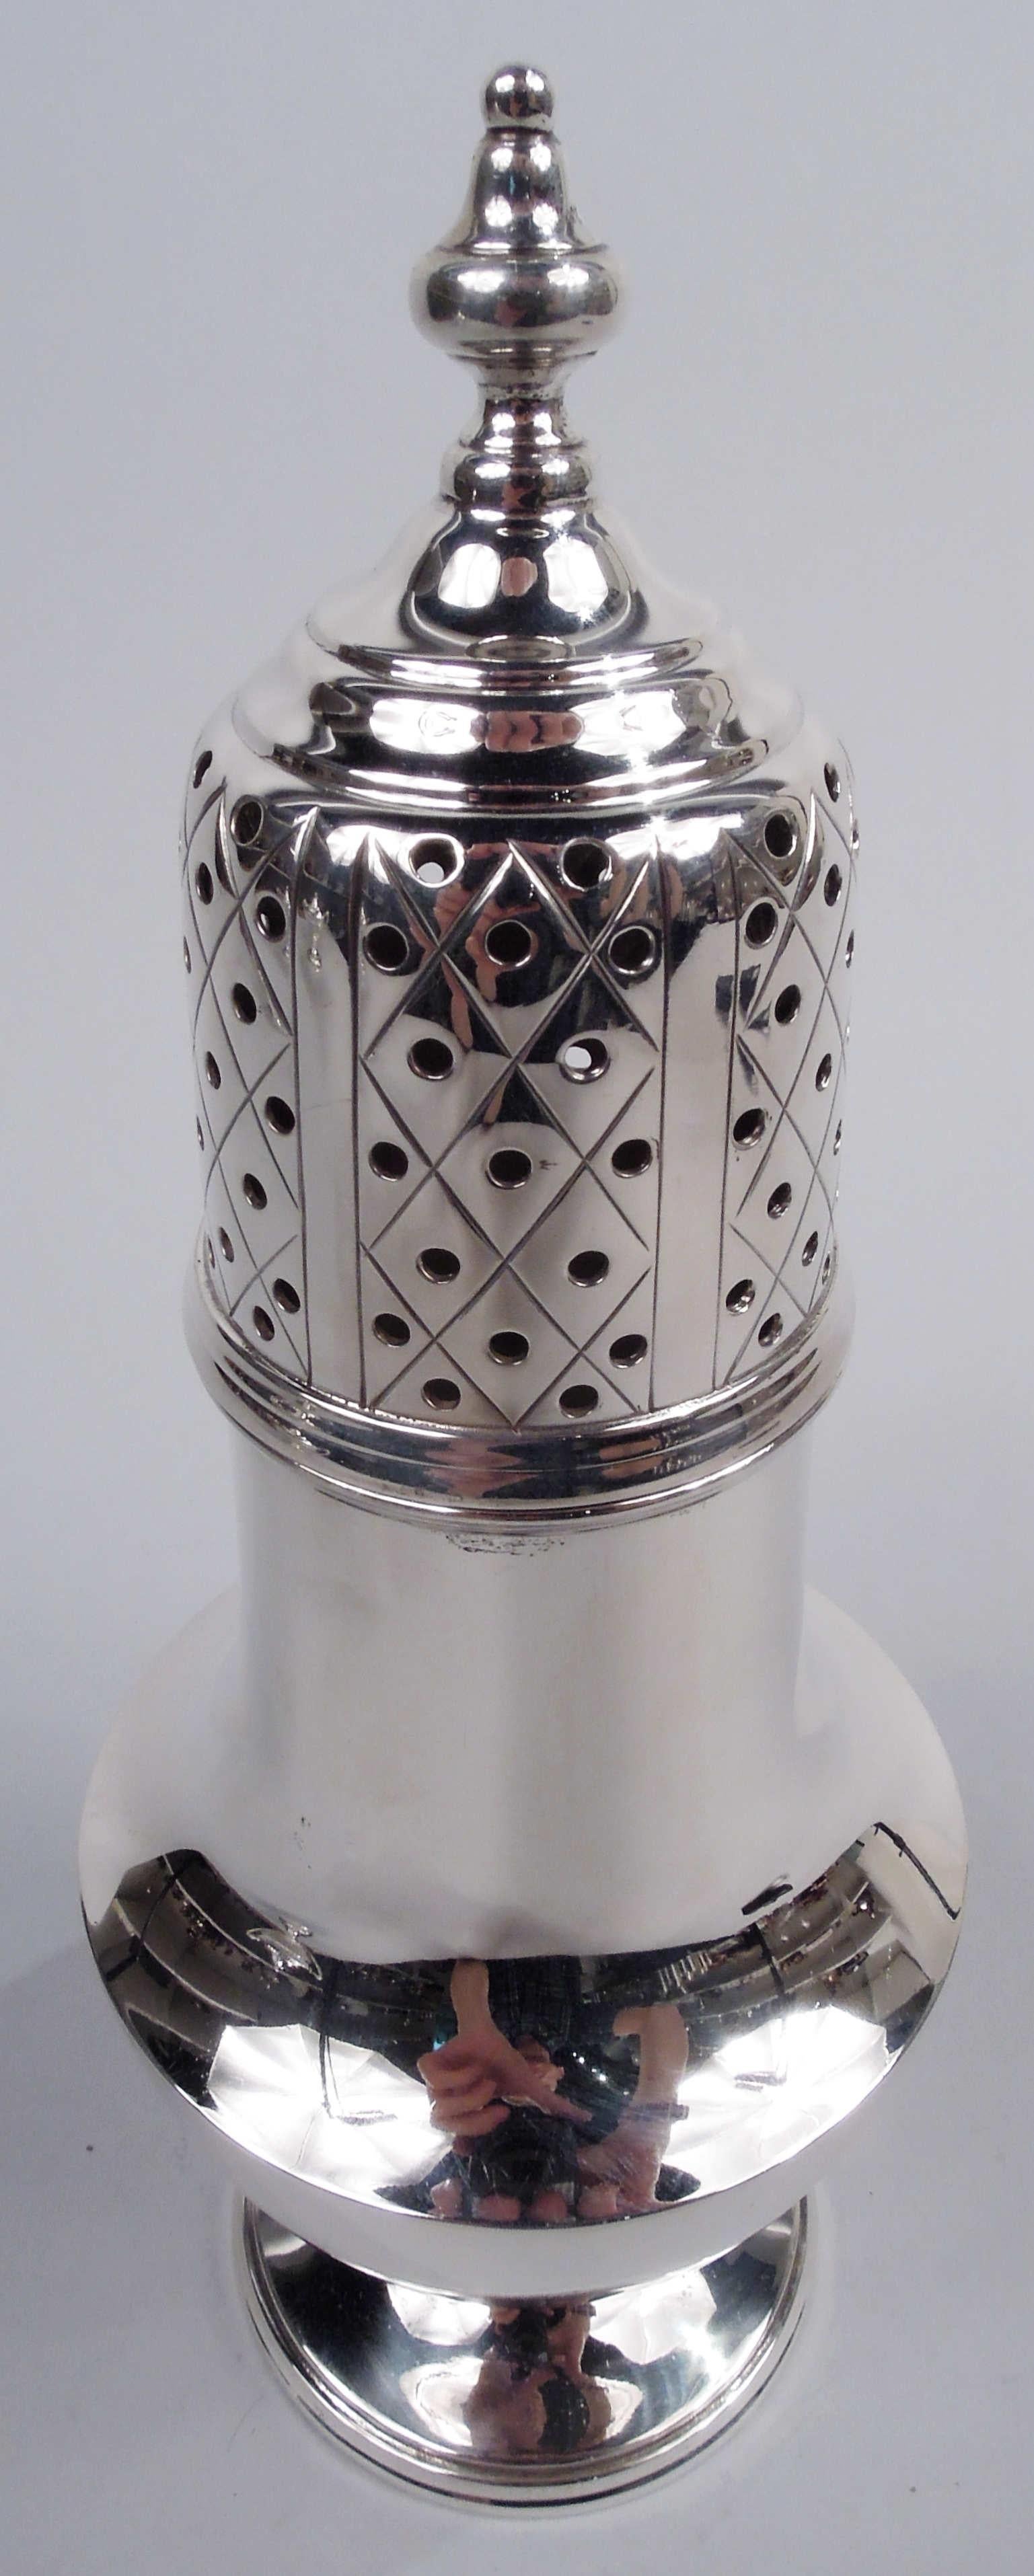 Edwardian Georgian sterling silver sugar caster. Made by Tuttle in Boston, ca 1910. Baluster on stepped round foot. Cover has stepped top with vasiform finial; sides pierced with engraved diaper. Fully marked including maker’s stamp and no. 25.